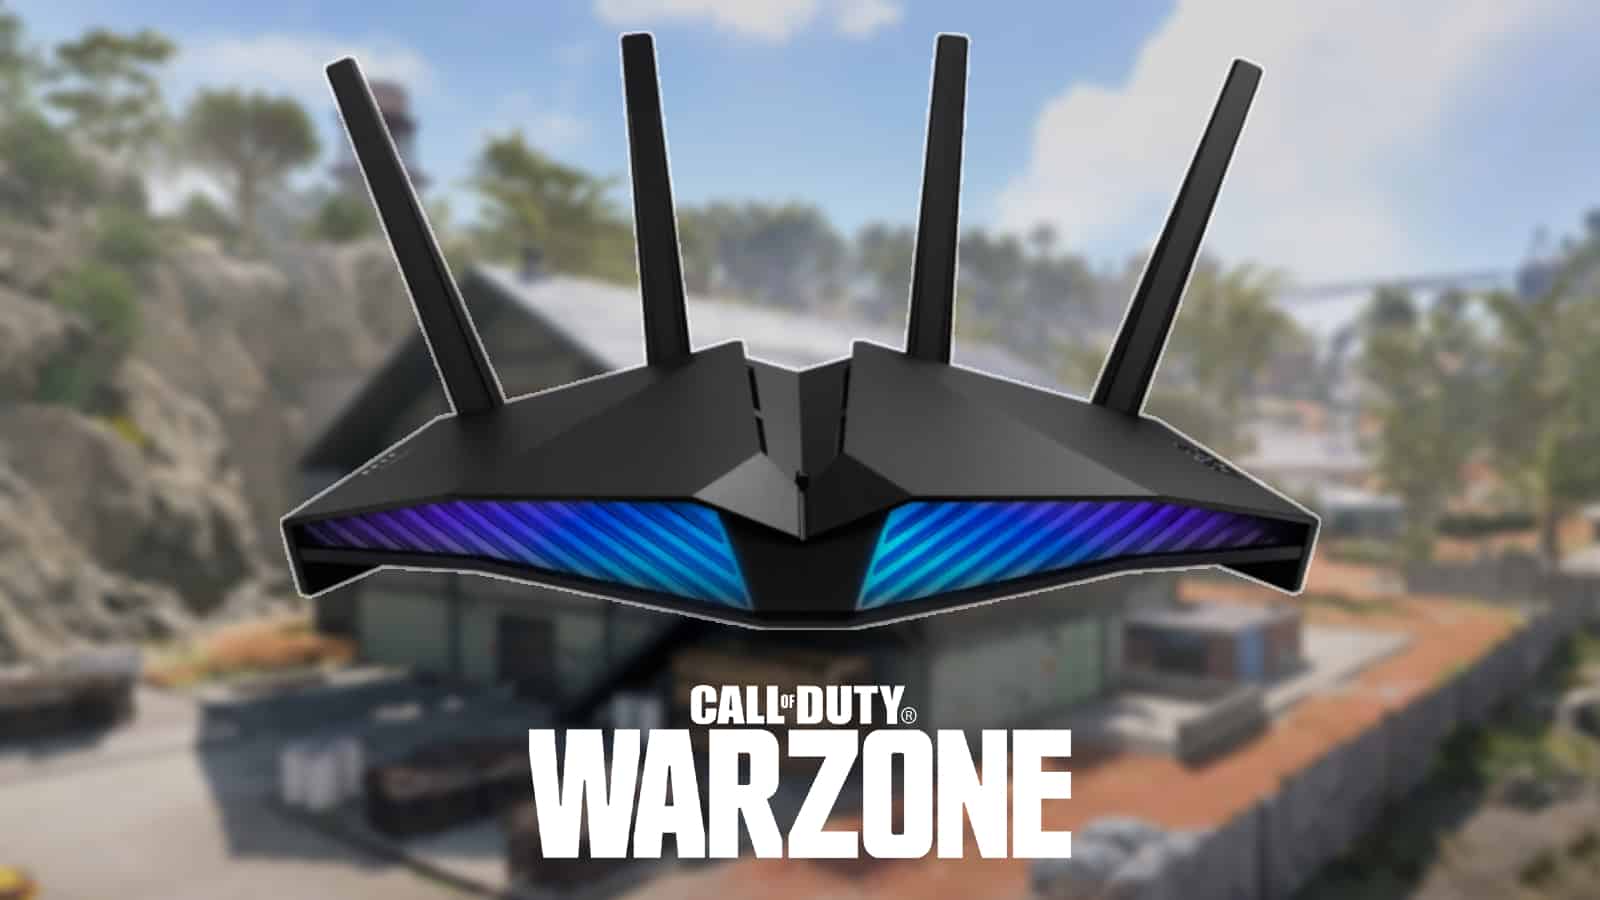 Warzone fans convinced that streamers use VPNs to find easier lobbies